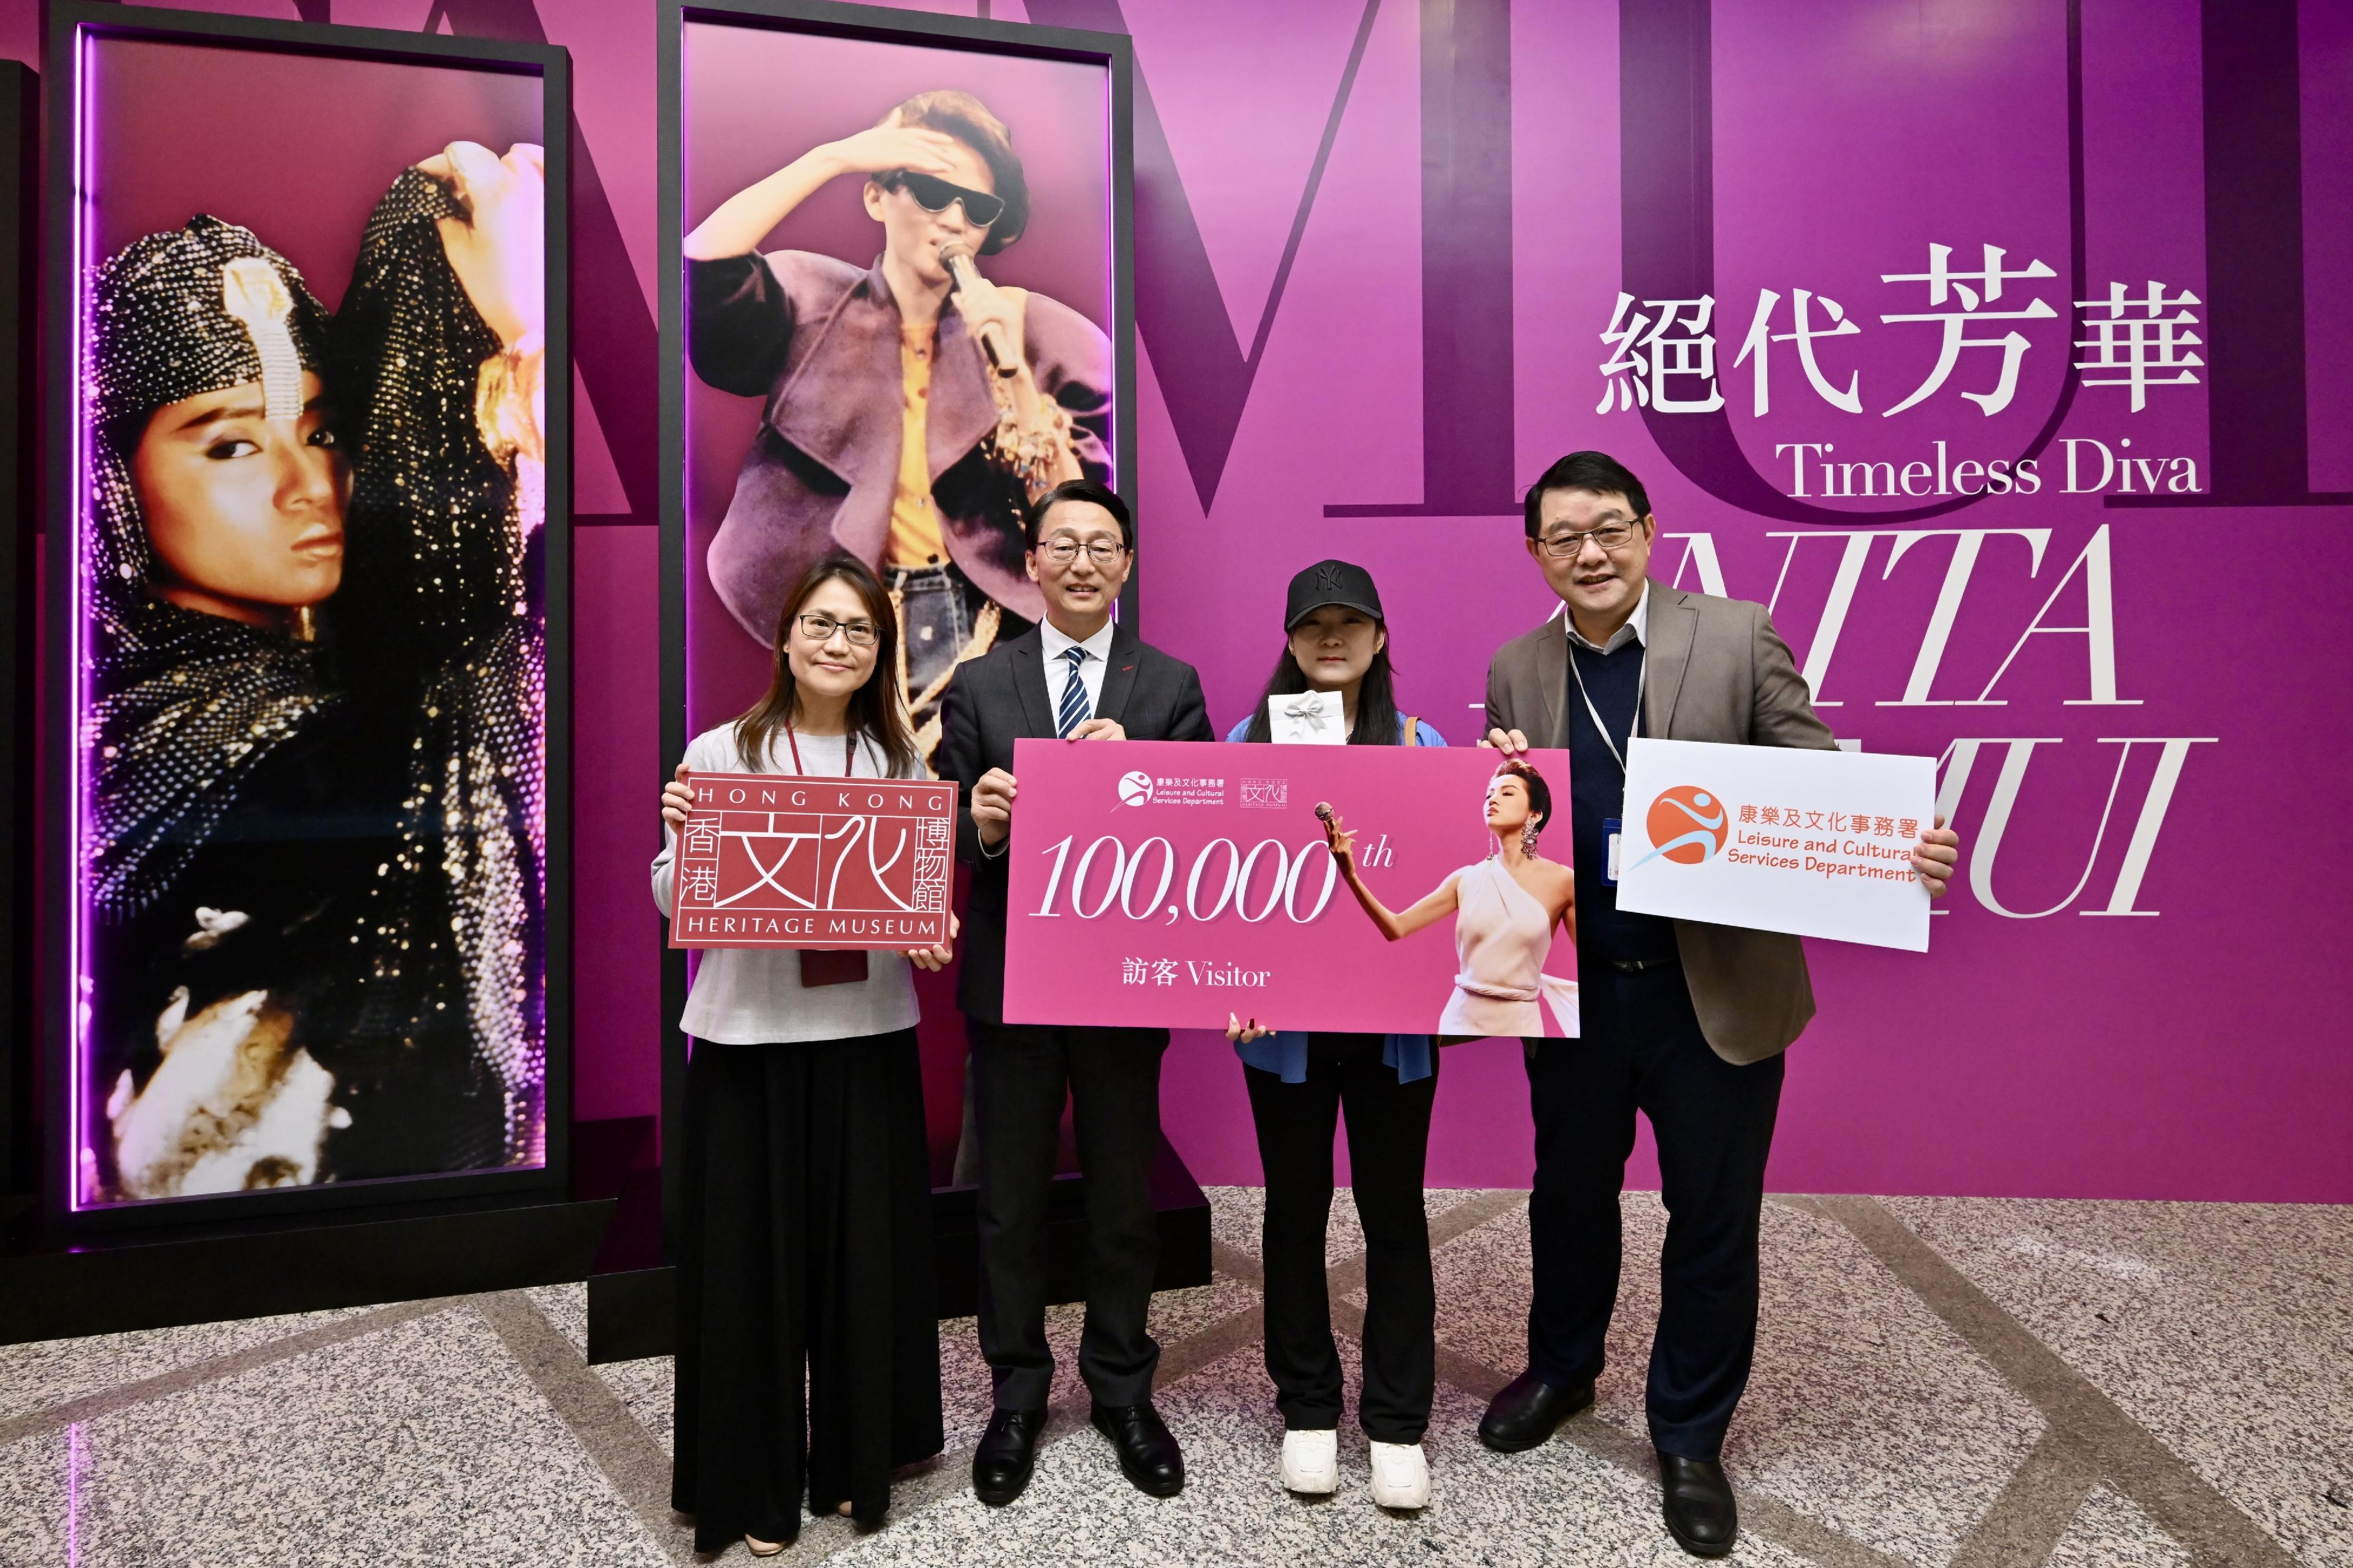 The ongoing exhibition at the Hong Kong Heritage Museum (HKHM) of the Leisure and Cultural Services Department, "Timeless Diva: Anita Mui", is highly acclaimed by the public and has reached 100 000 visitors from its opening on December 24 last year to yesterday (March 6). Picture shows the Director of Leisure and Cultural Services, Mr Vincent Liu (second left); the Museum Director of the HKHM, Mr Brian Lam (first right); and the Curator (History) of the HKHM, Ms Irene Chan (first left), welcoming the 100 000th visitor of the exhibition and presenting a gift pack to the visitor.